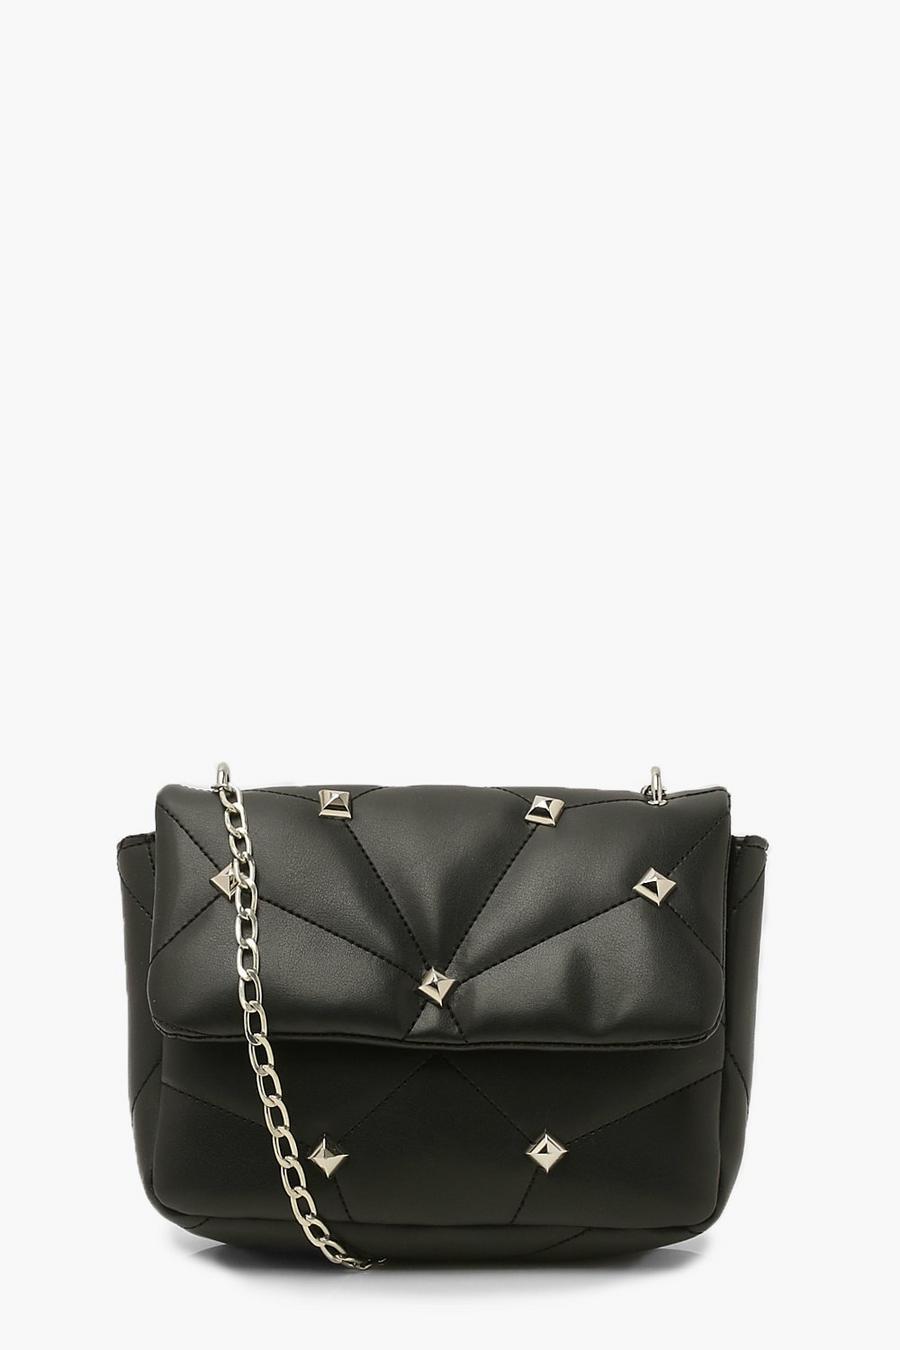 Black Quilted Pu Cross Body With Studded Detail image number 1